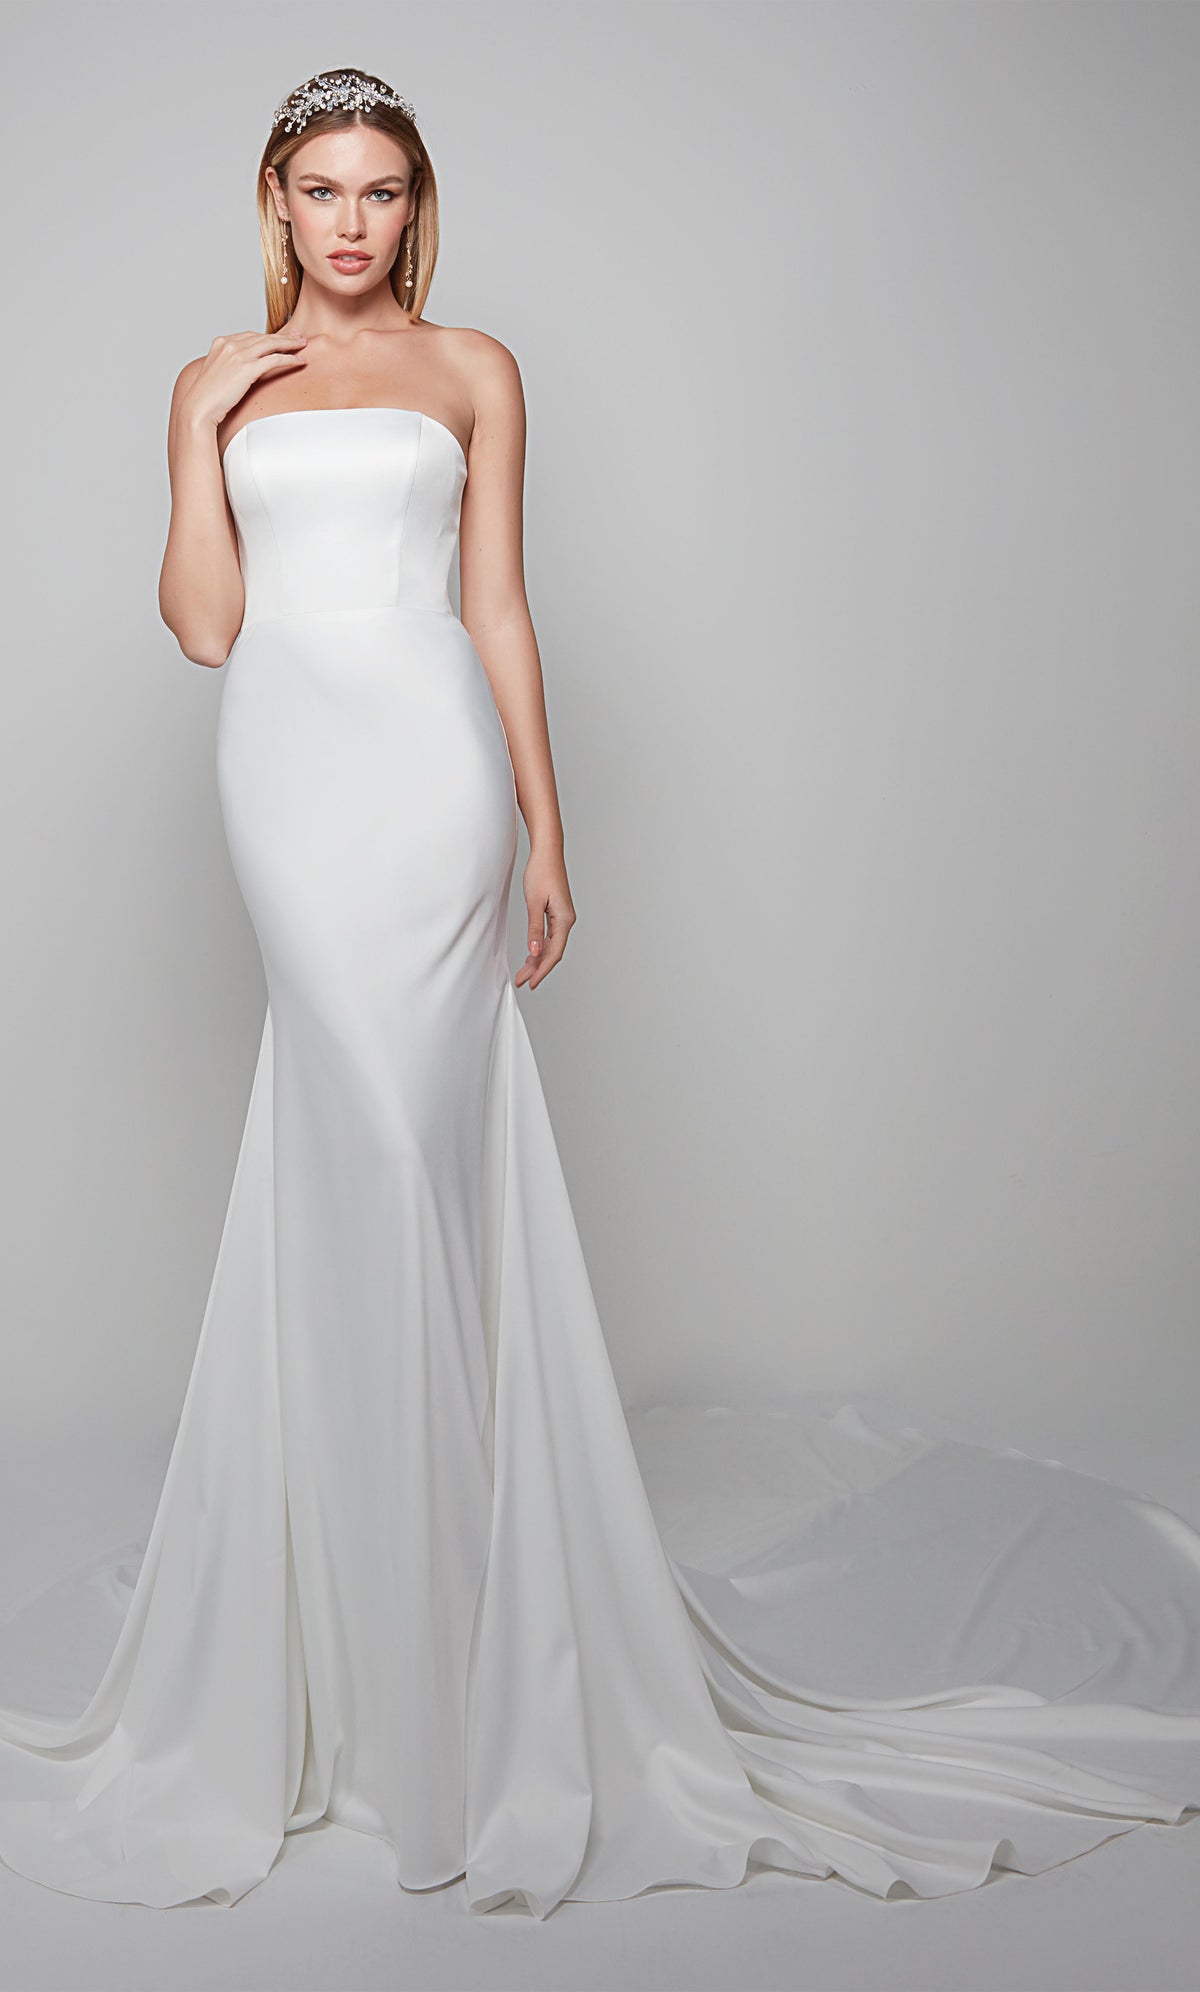 Simple wedding dress with a strapless neckline and fit and flare design in white.